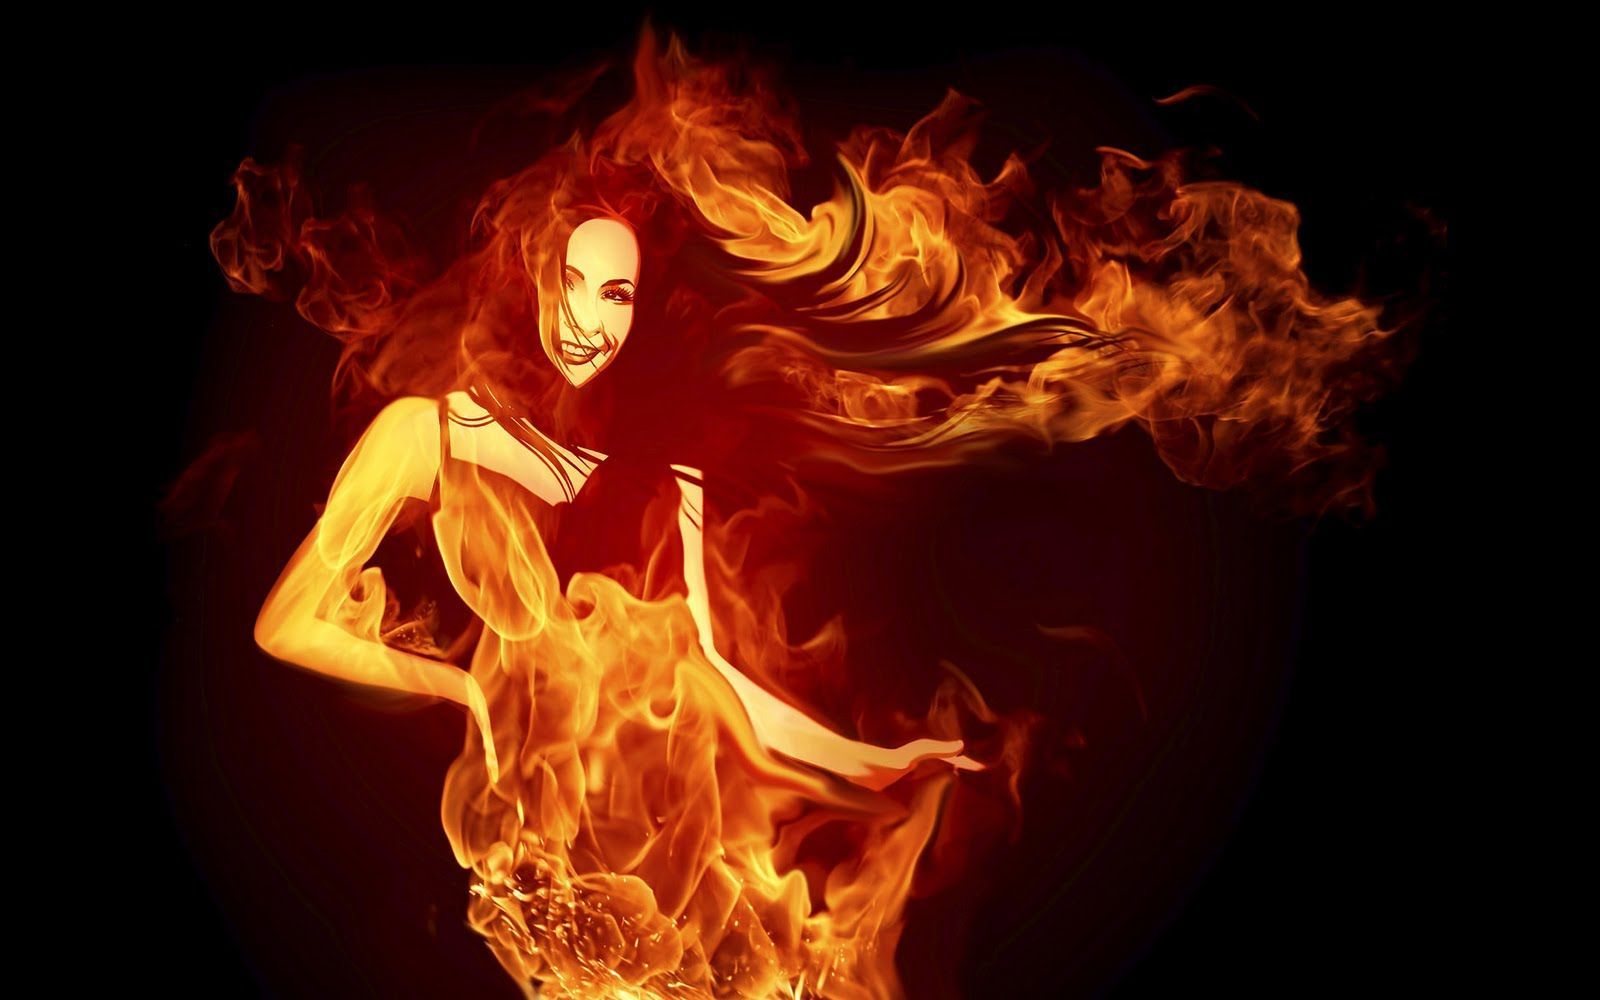 Flame Desktop Wallpaper, Flame Images Free, New Wallpapers